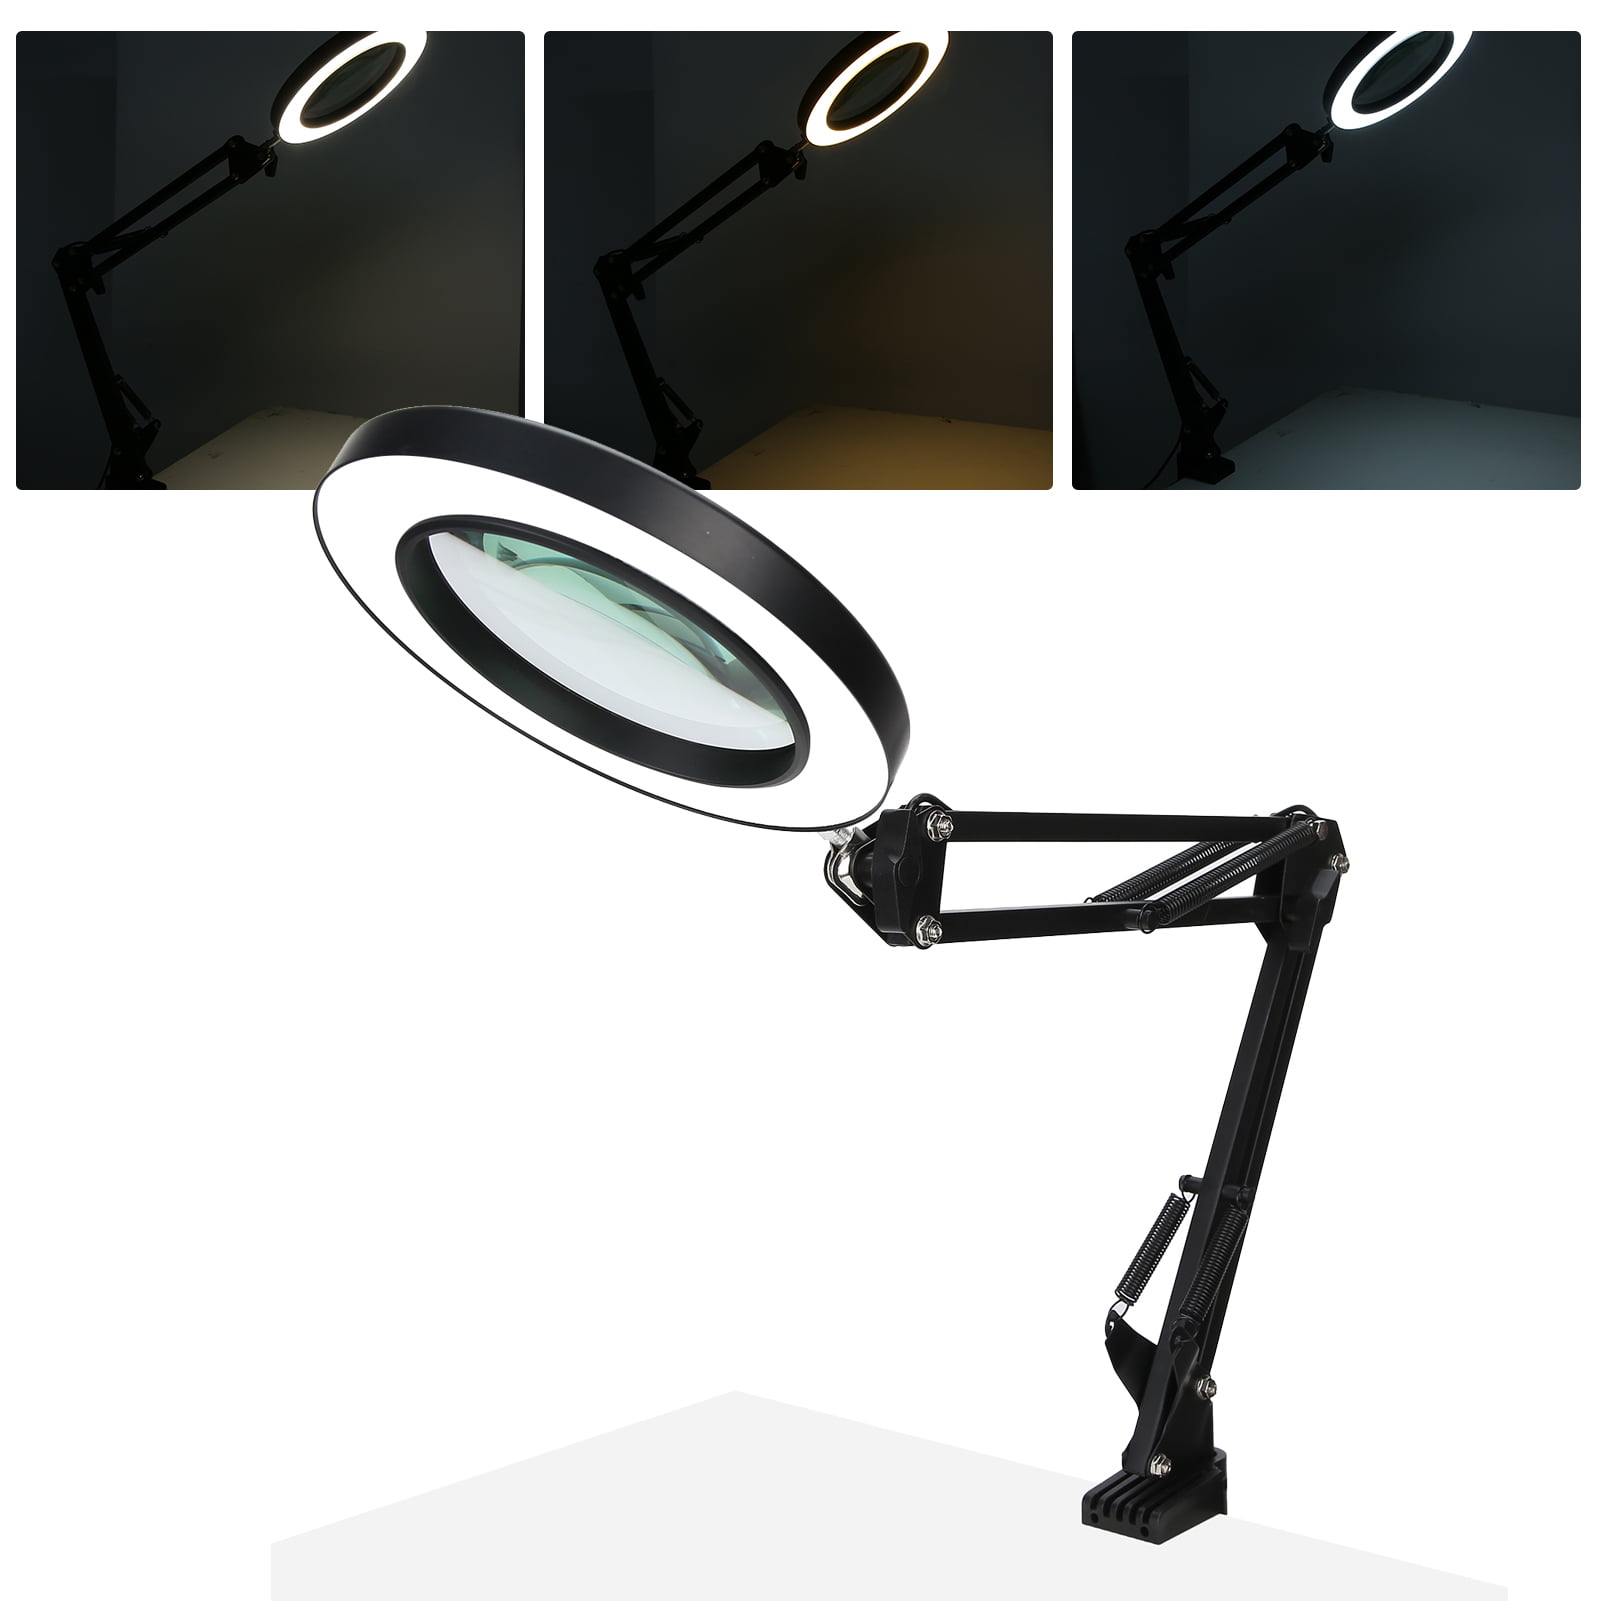 Magnifying Glass with Light and Stand Magnifier 10X LED lamp Enlarged Central annular Adjustable Spotlight Light Source luminance USB Power Magnifier Magnifier for Reading 